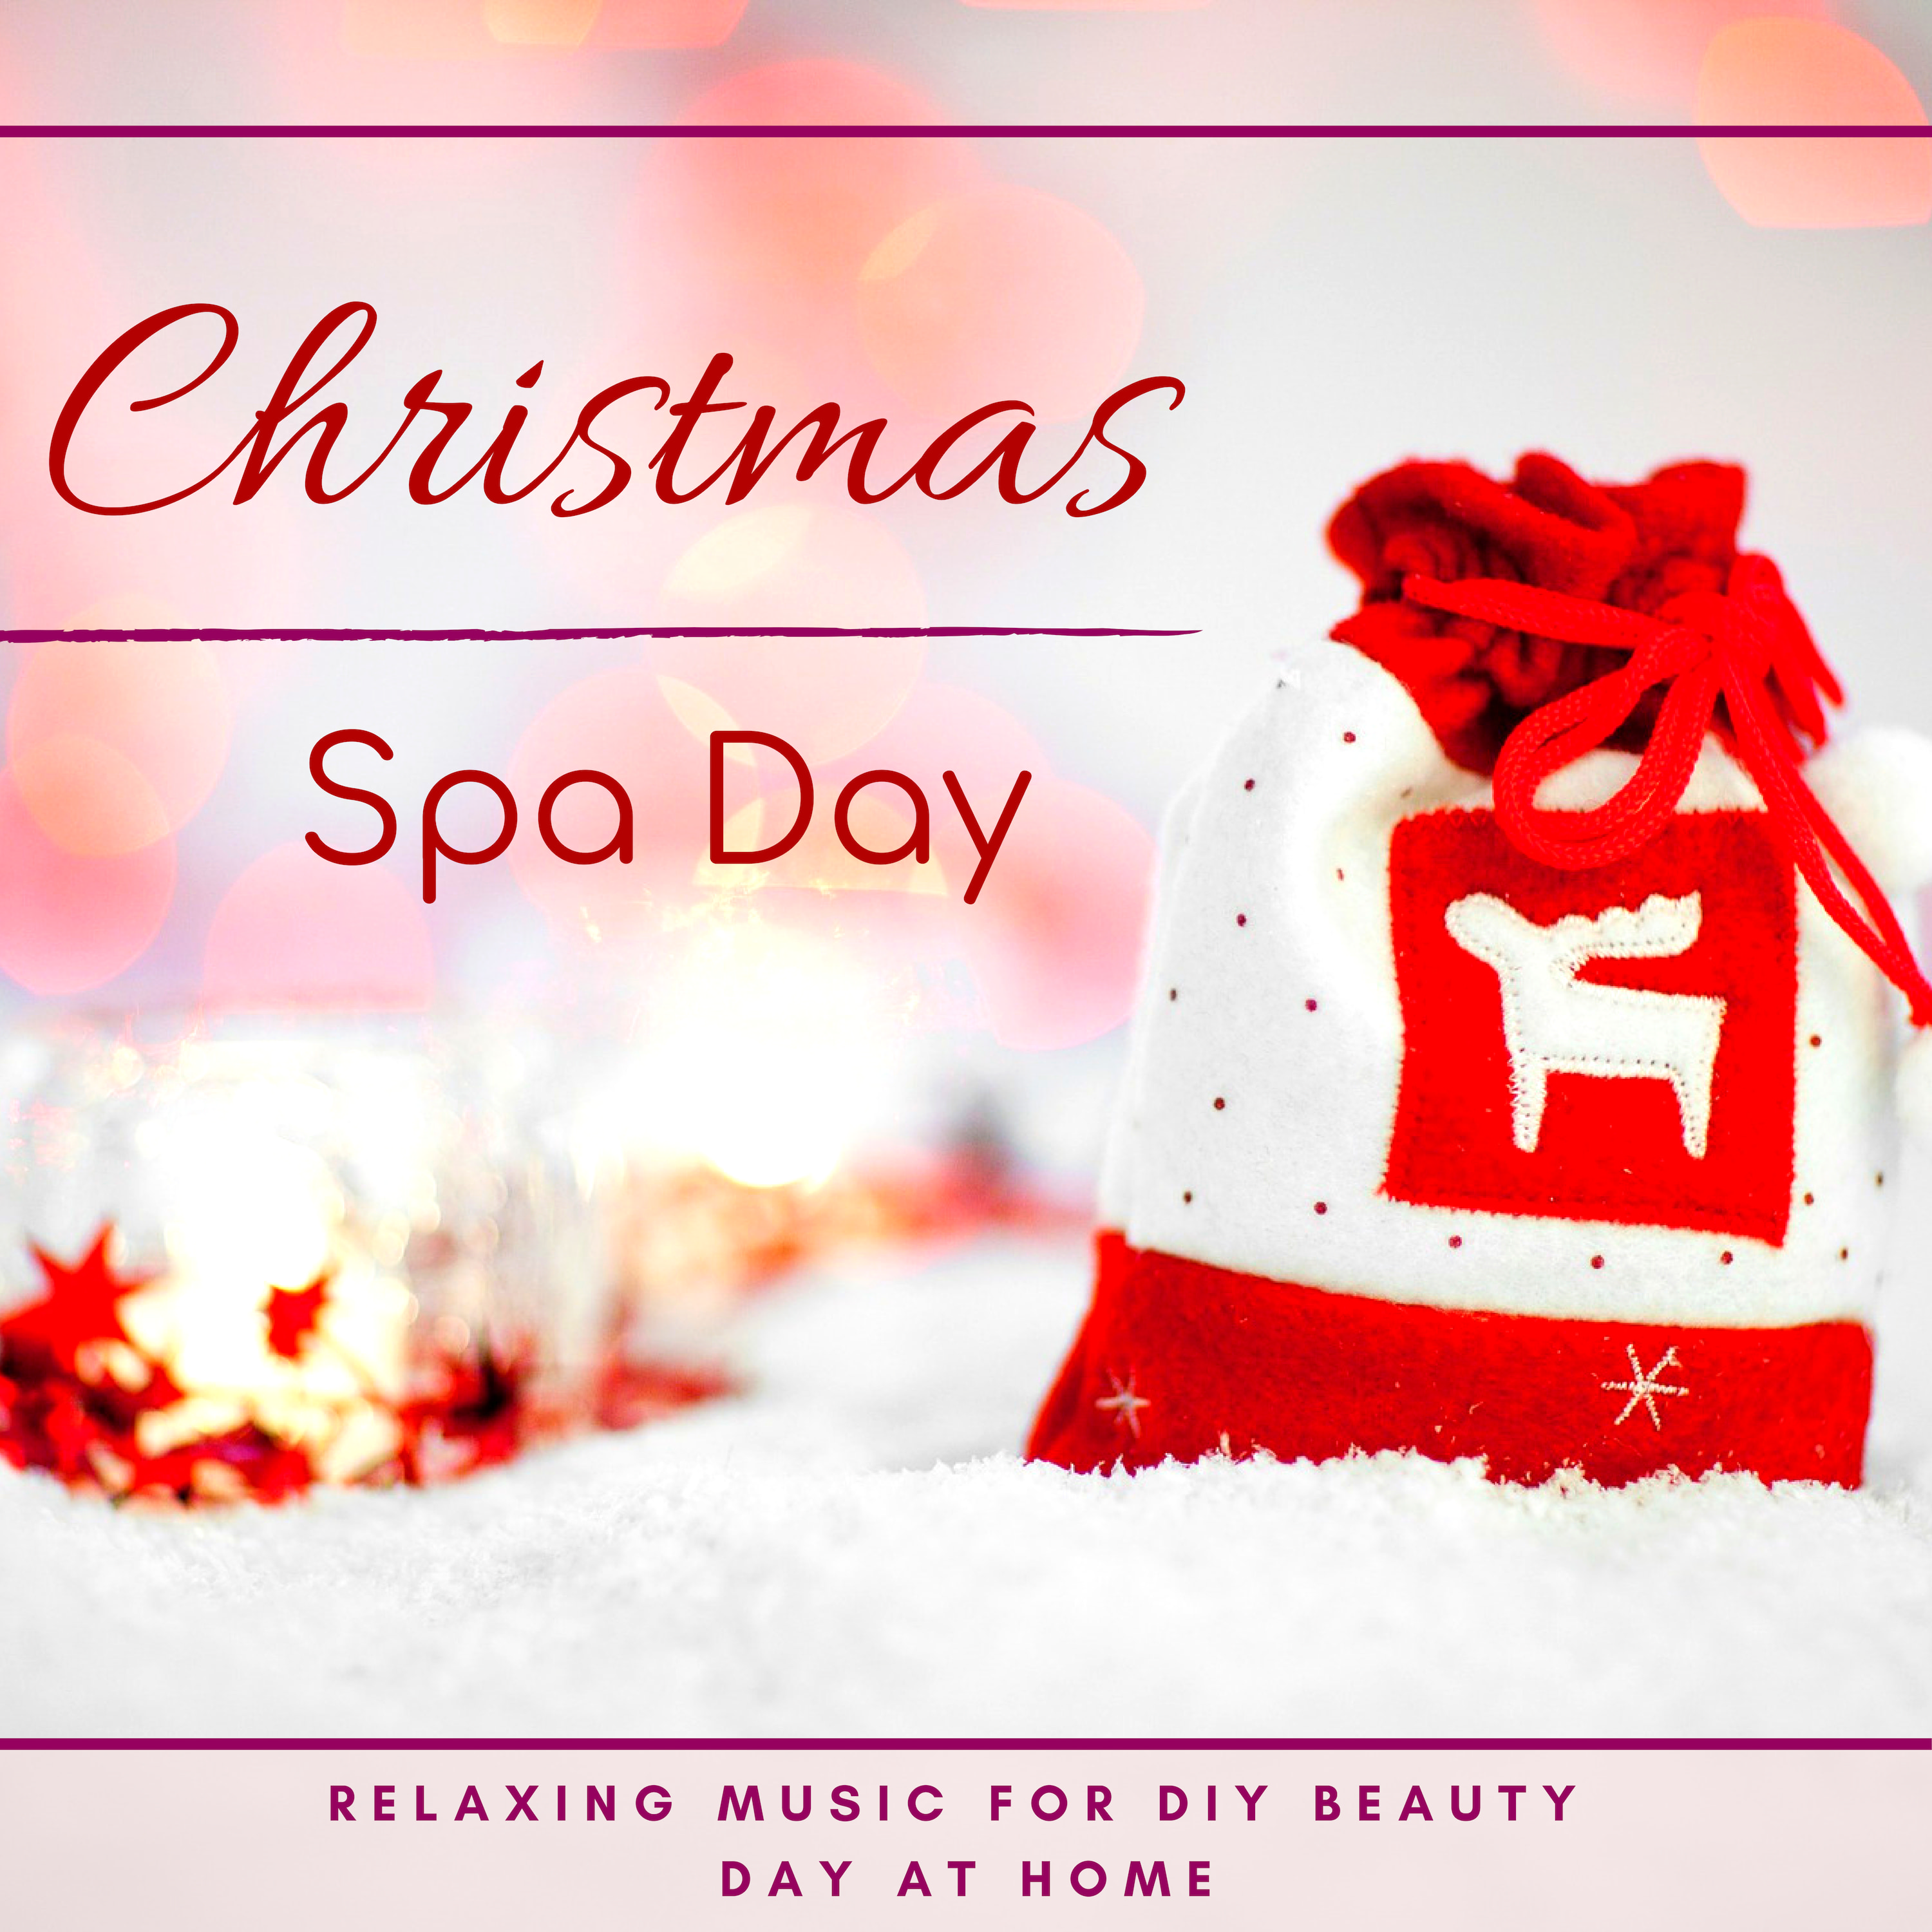 Christmas Spa Day - Relaxing Music for DIY Beauty Day at Home